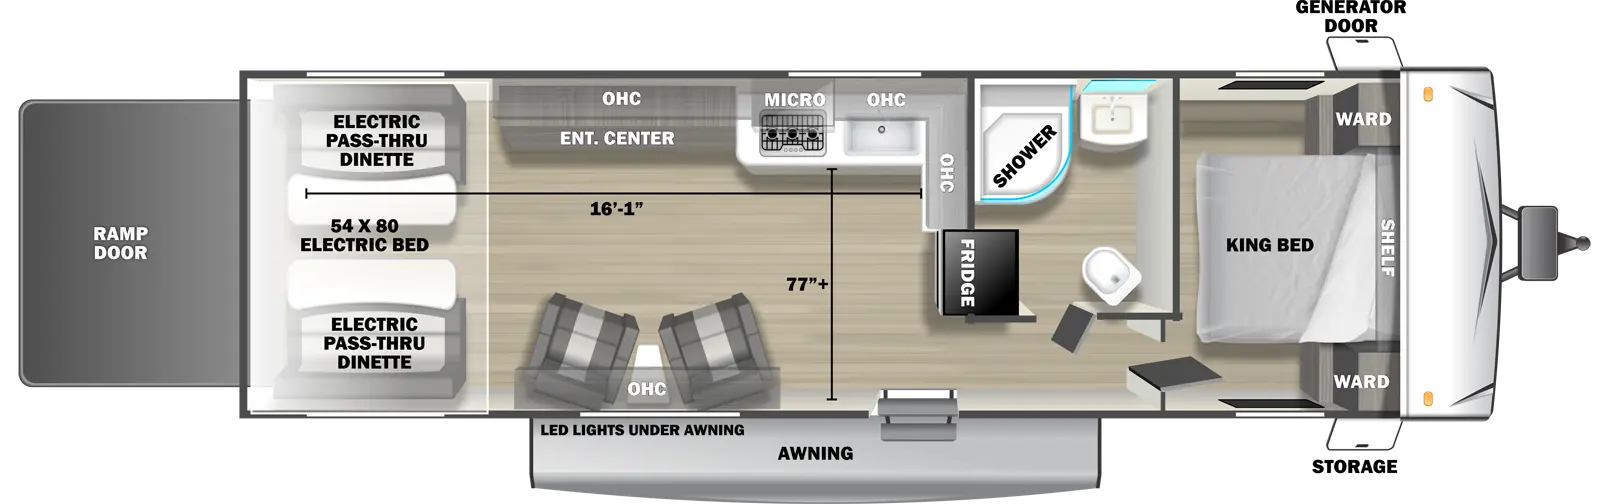 The 2730SLX travel trailer has no slide outs, 1 entry door and 1 rear ramp door. Exterior features include an awning with LED lights, front door side storage and front off-door side generator door. Interior layout from front to back includes: front bedroom with foot-facing King bed, shelf over the bed, and front corner wardrobes; off-door side bathroom with shower, linen storage, toilet and single sink vanity; off-door side kitchen with L-shaped countertop, overhead microwave, overhead cabinets, sink and rear facing refrigerator; door side overhead cabinet over 2 recliners with end table; off-door side entertainment center with overhead cabinet; and rear 54 x 80 electric bed over electric pass-through dinette. Cargo length from rear of unit to kitchen countertop is 16 ft. 1 in. Cargo width from kitchen countertop to door side wall is 77 inches.